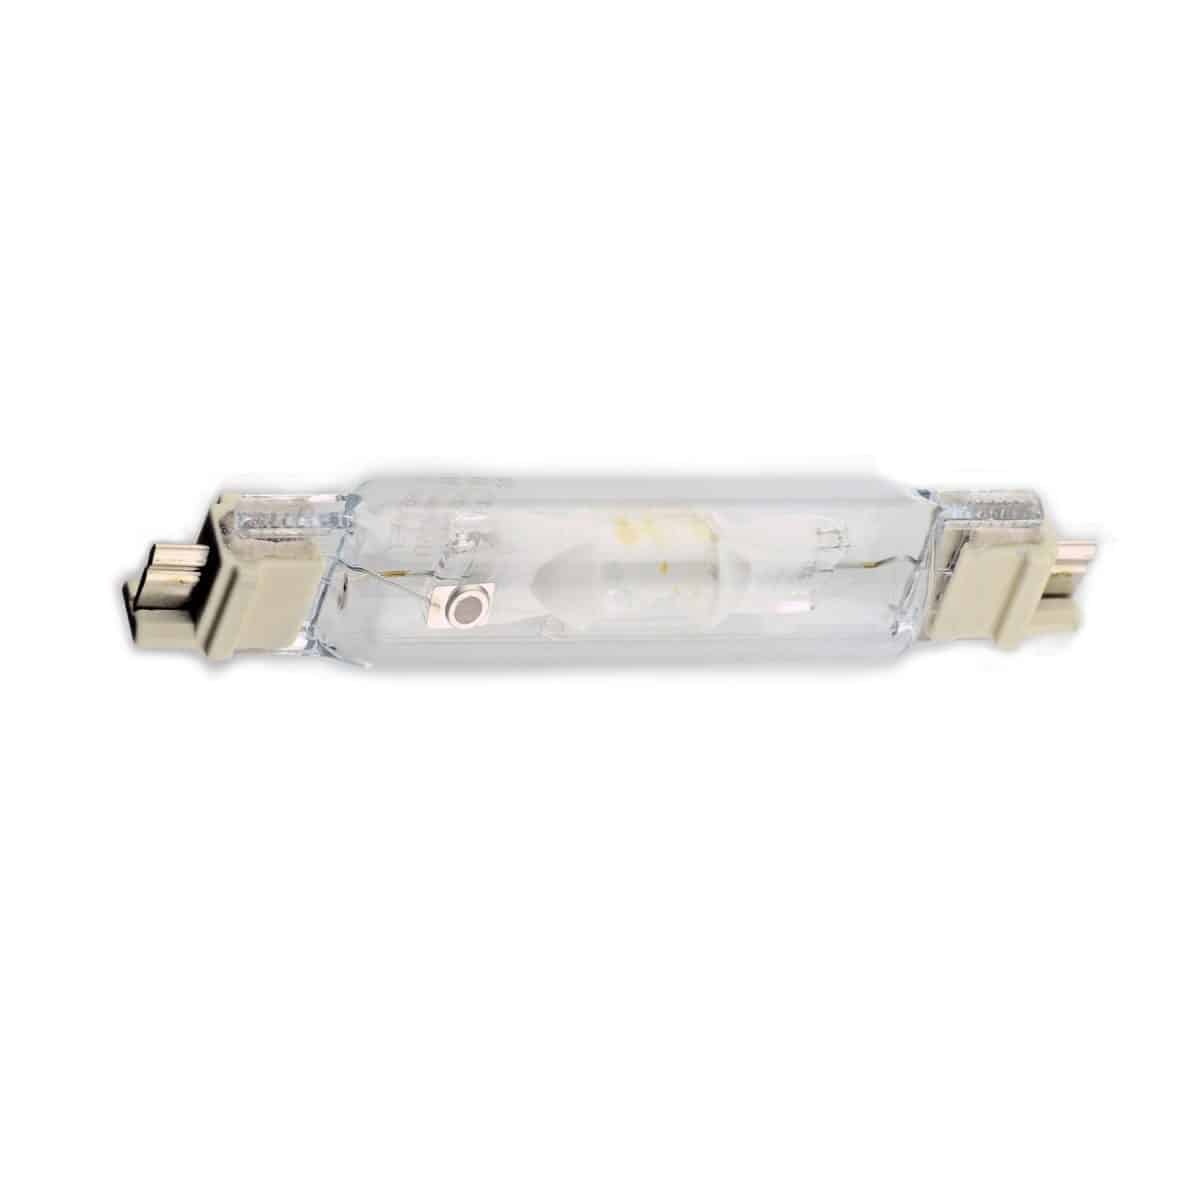 250watt High Intensity Discharge Lamp FC2 HQITS Double Ended Colour 942 Natural Daylight